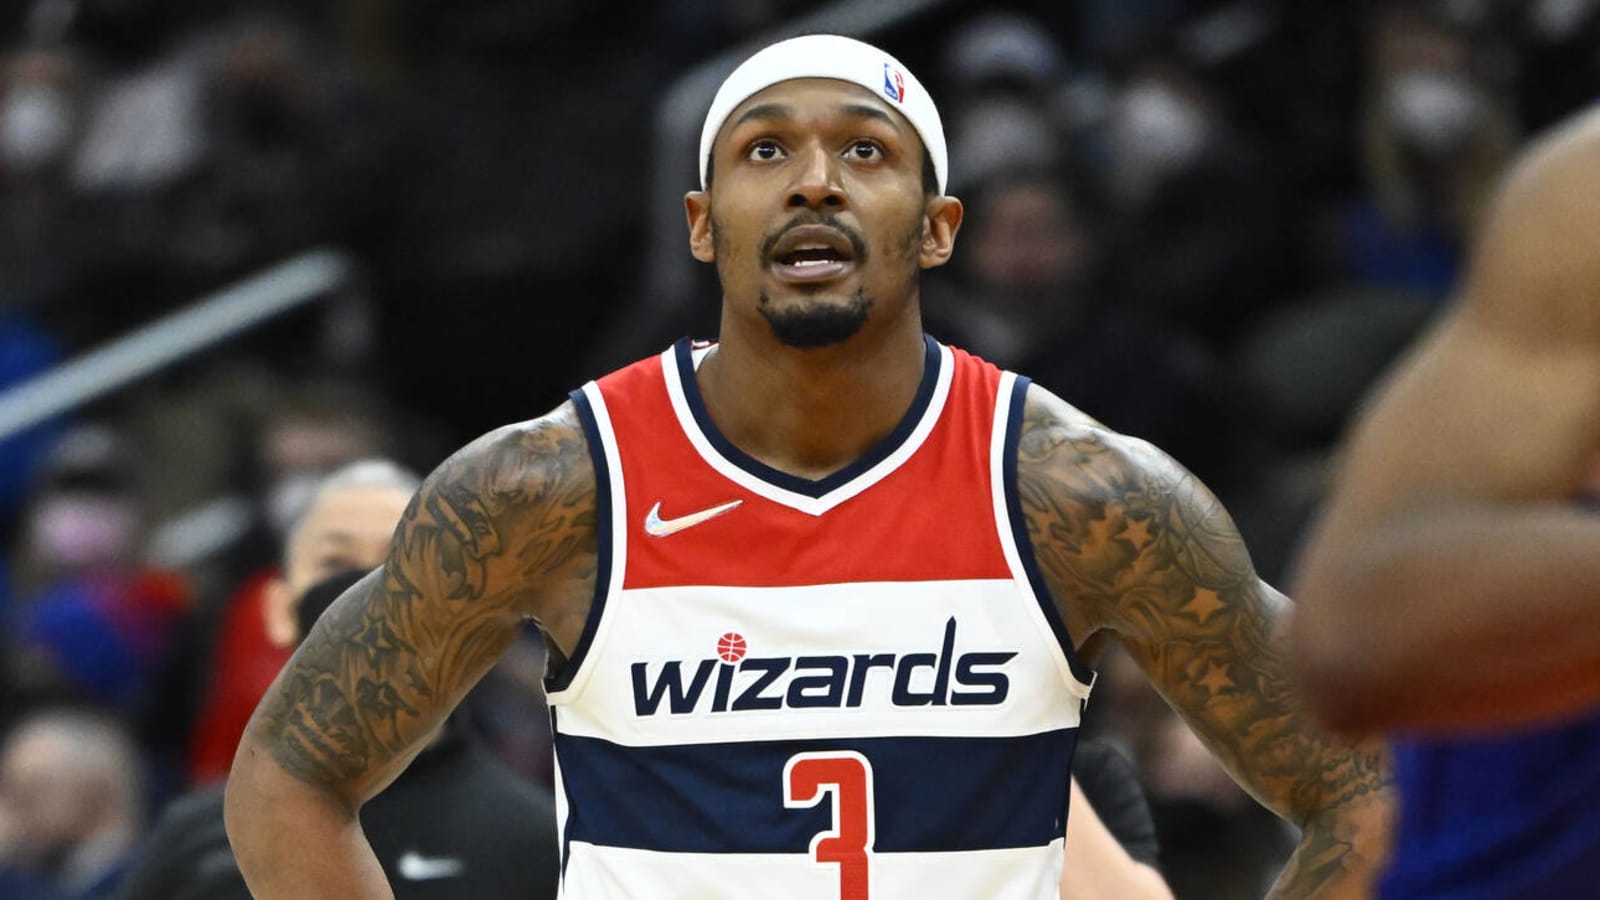 Bradley Beal declines player option, becomes free agent